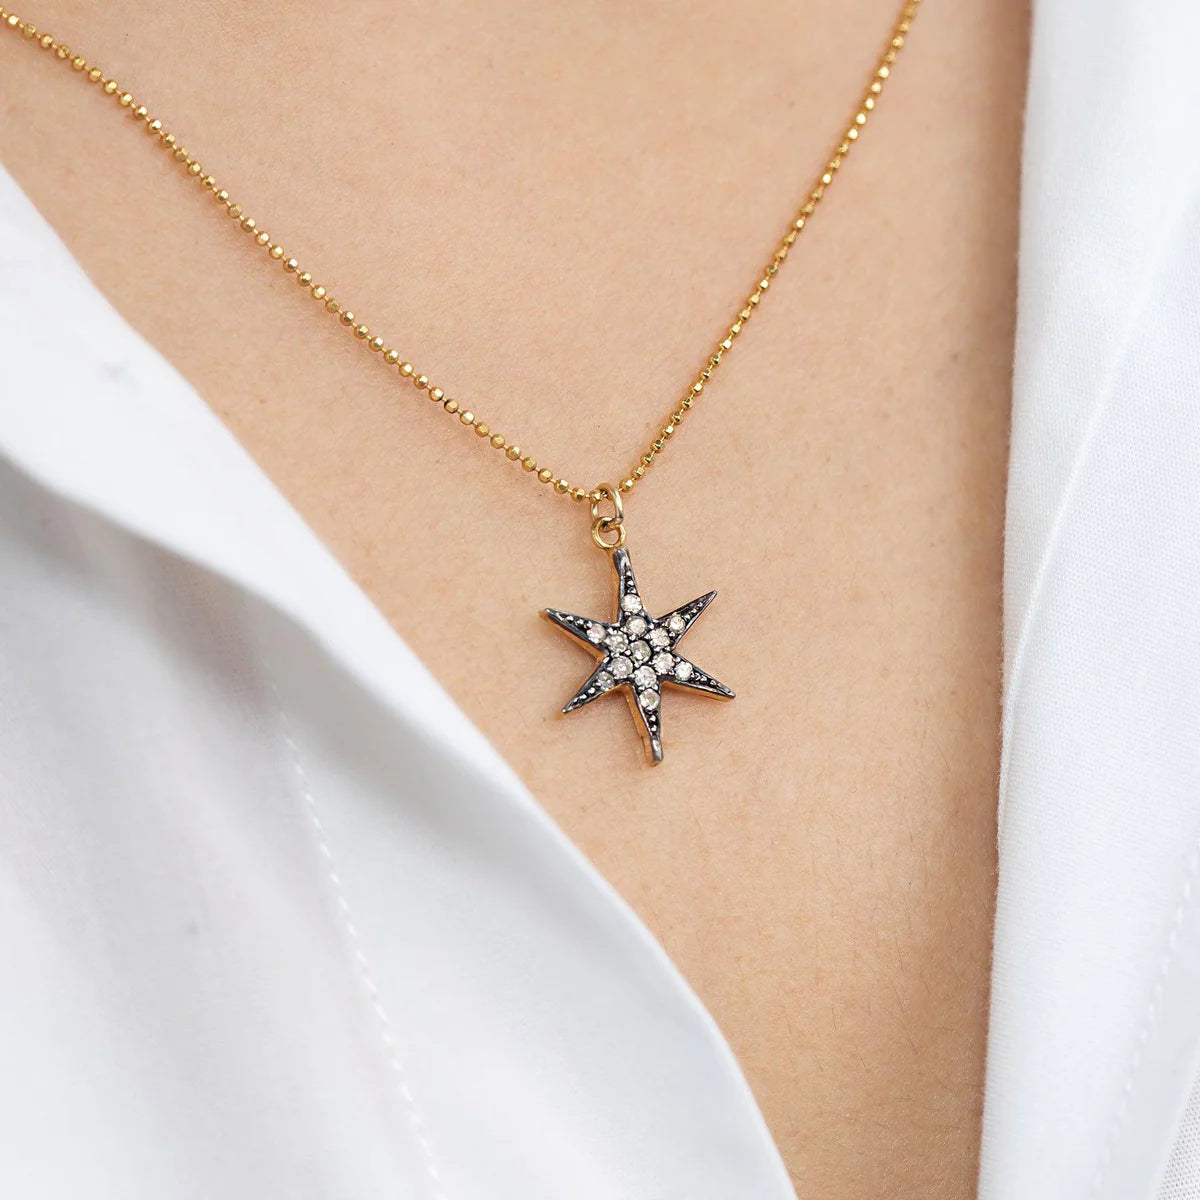 NEW-cosmic-star-necklace-GOLD_1200x.webp__PID:88117745-5593-4fdc-8944-5d02c0e9995e